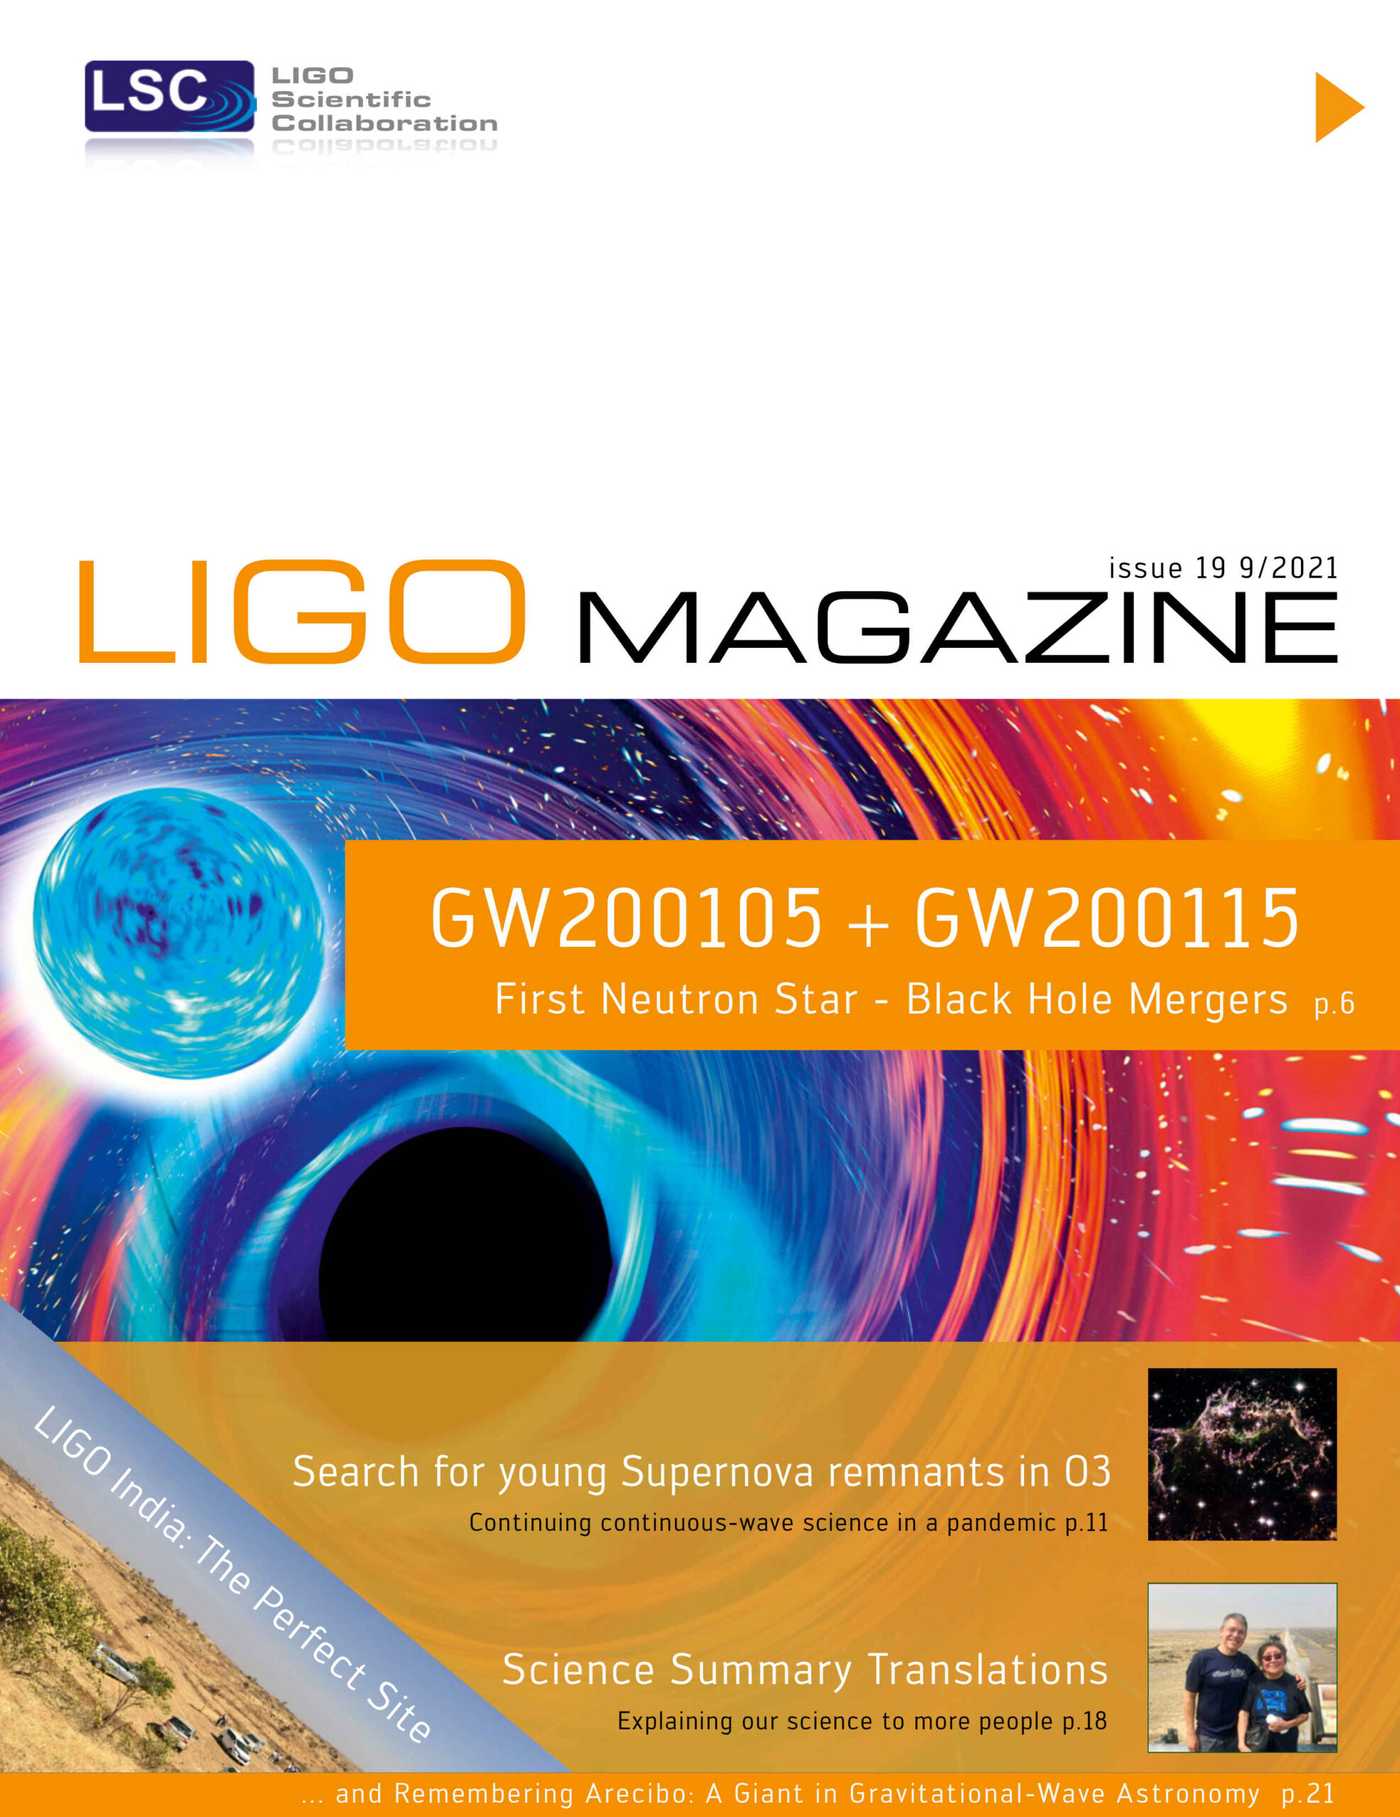 News-Image 45 of: New LIGO Magazine Issue 19 is out